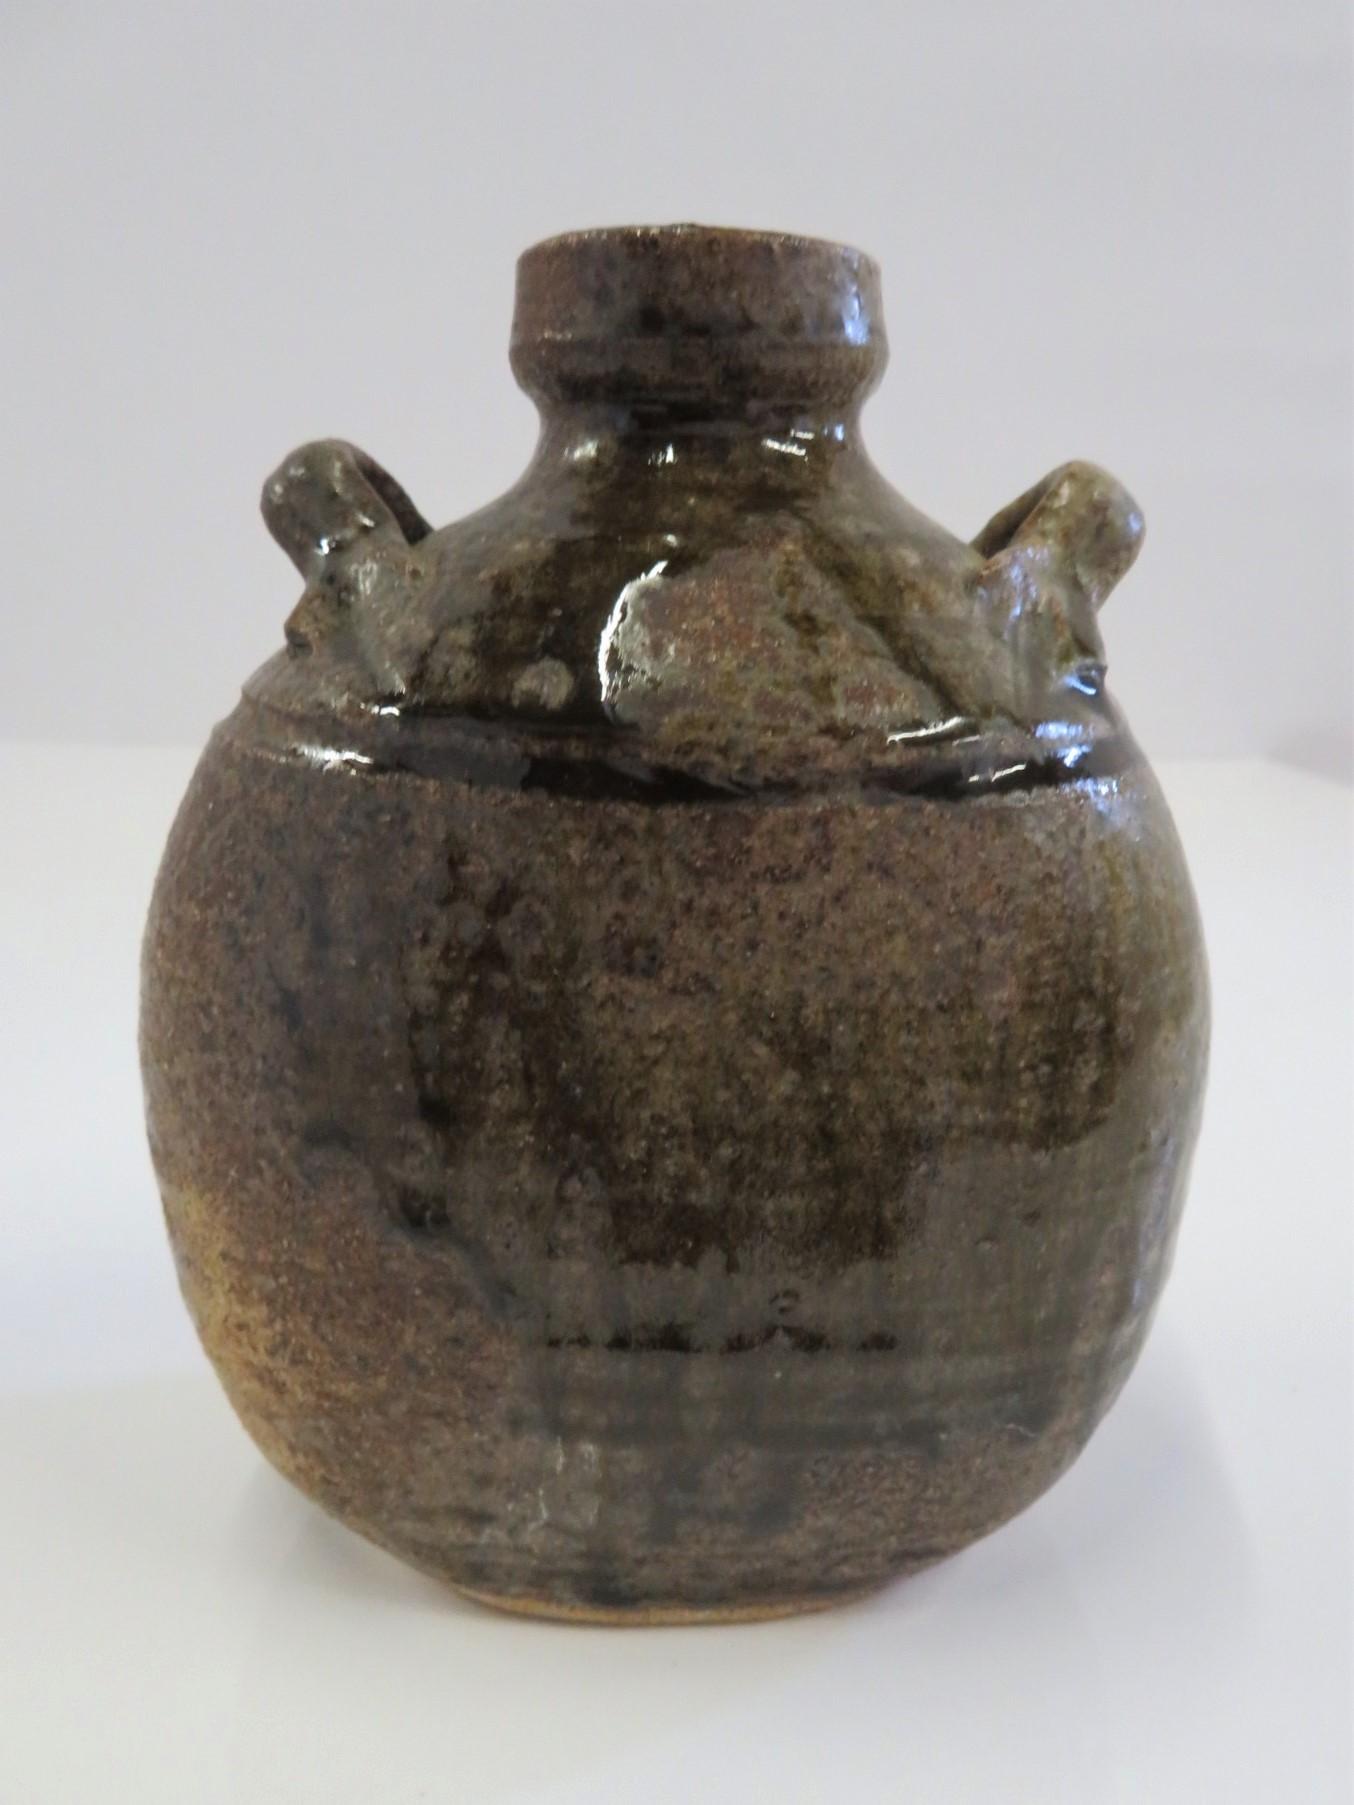 REDUCED FROM $350.....From the studio of Elinor Jensen, a two handled raku greenish saltglaze vessel signed in the clay on the bottom Jensen. A beautiful pot.
Measurements: 6 inches high x 5 inches wide x 3 1/2 inches deep.
 A member of the Ceramic